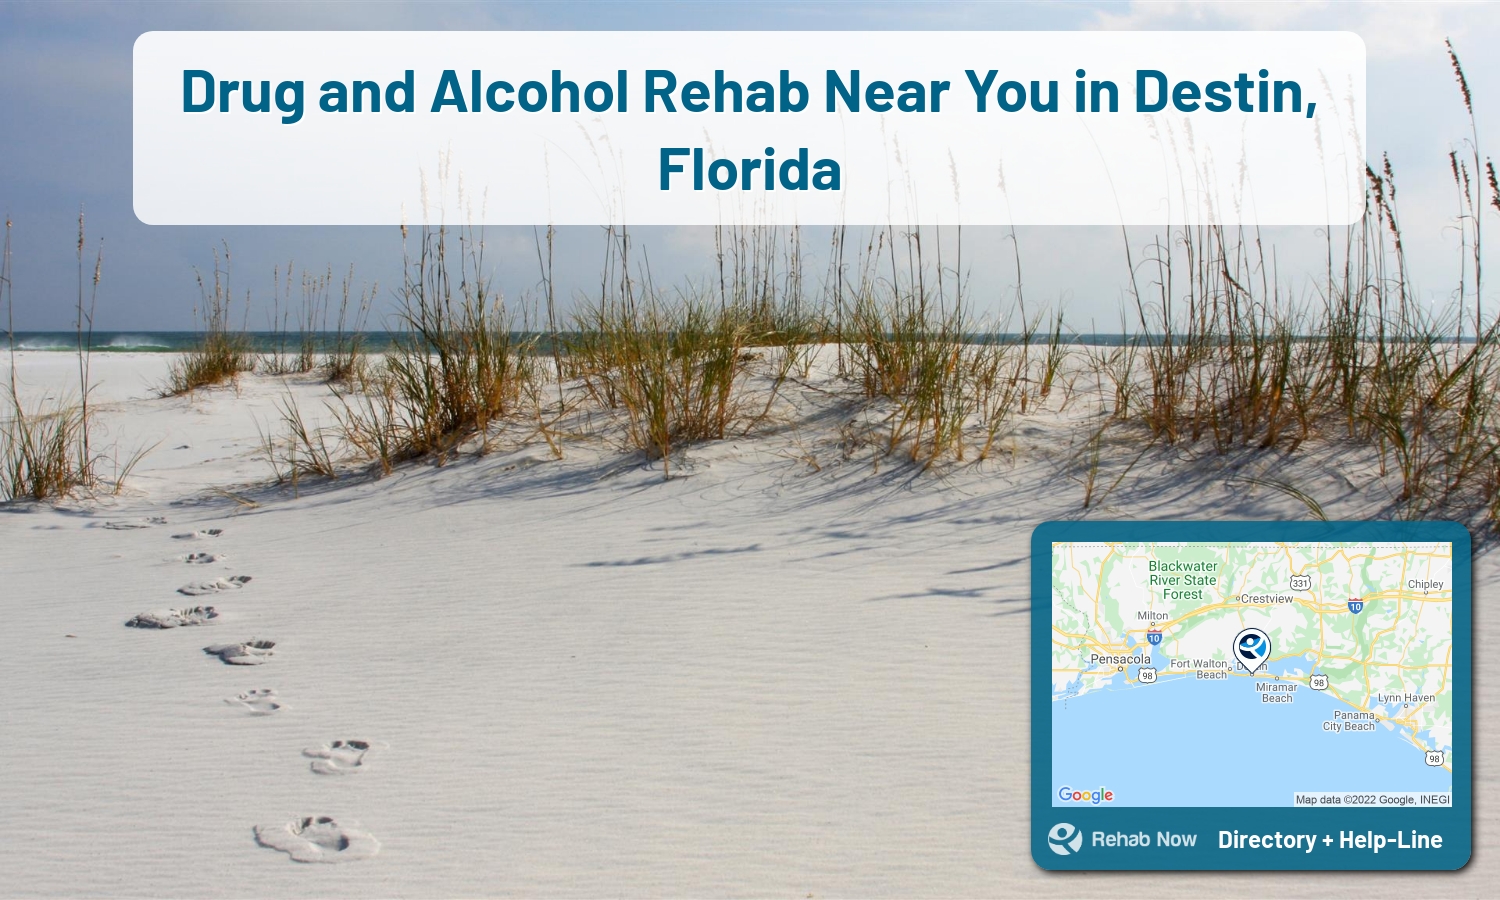 Find drug rehab and alcohol treatment services in Destin. Our experts help you find a center in Destin, Florida